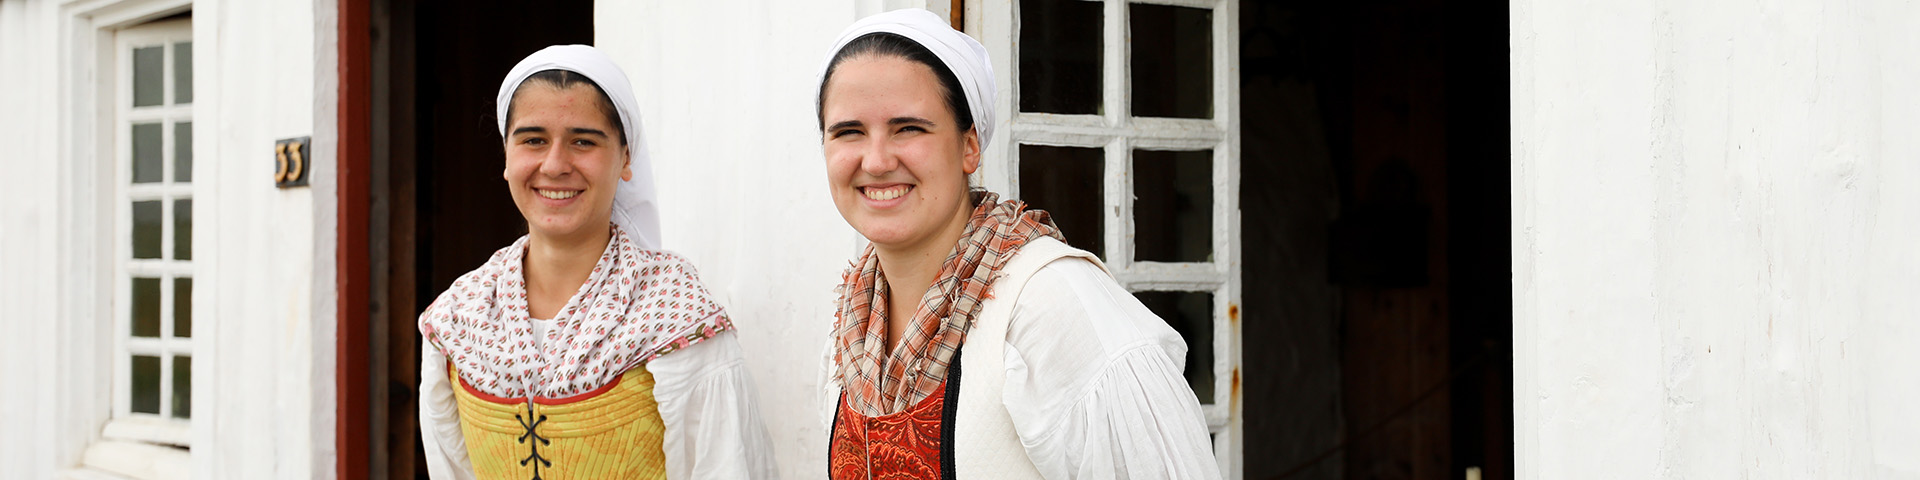 Two women smile at the camera wearing traditional Basque costumes